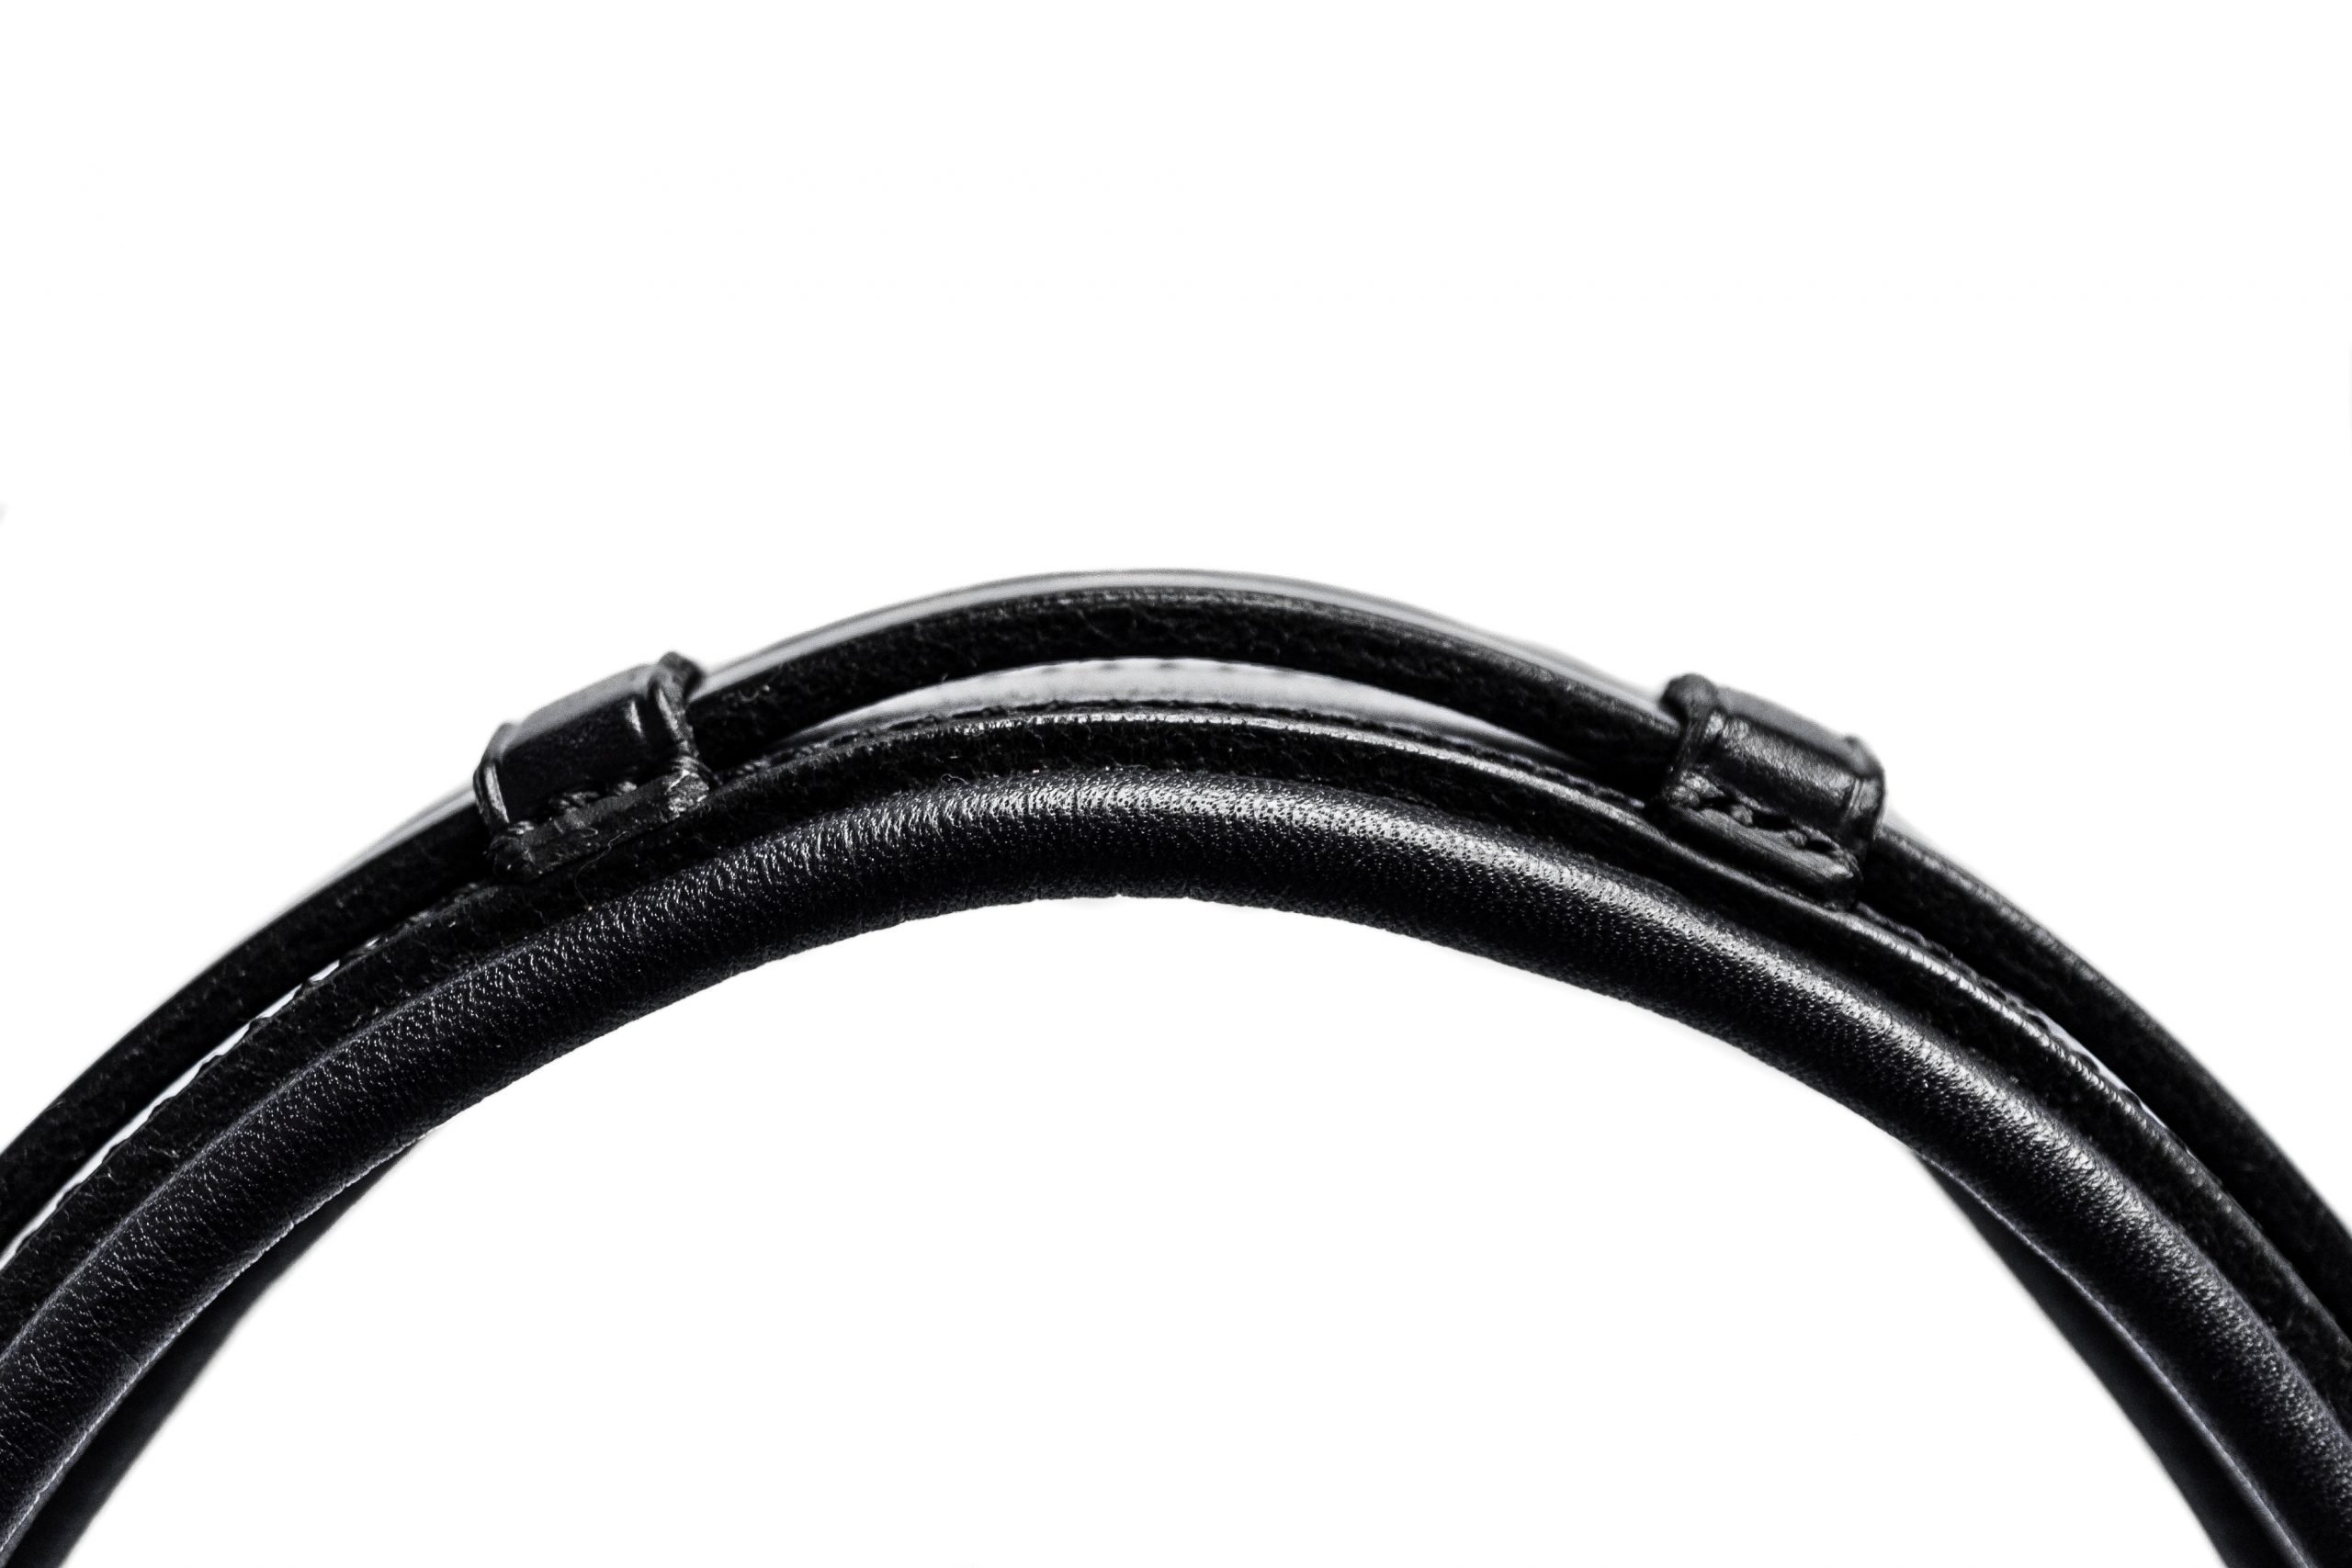 Deluxe Comfort Padded Anatomical Bridle by TC Leatherwork